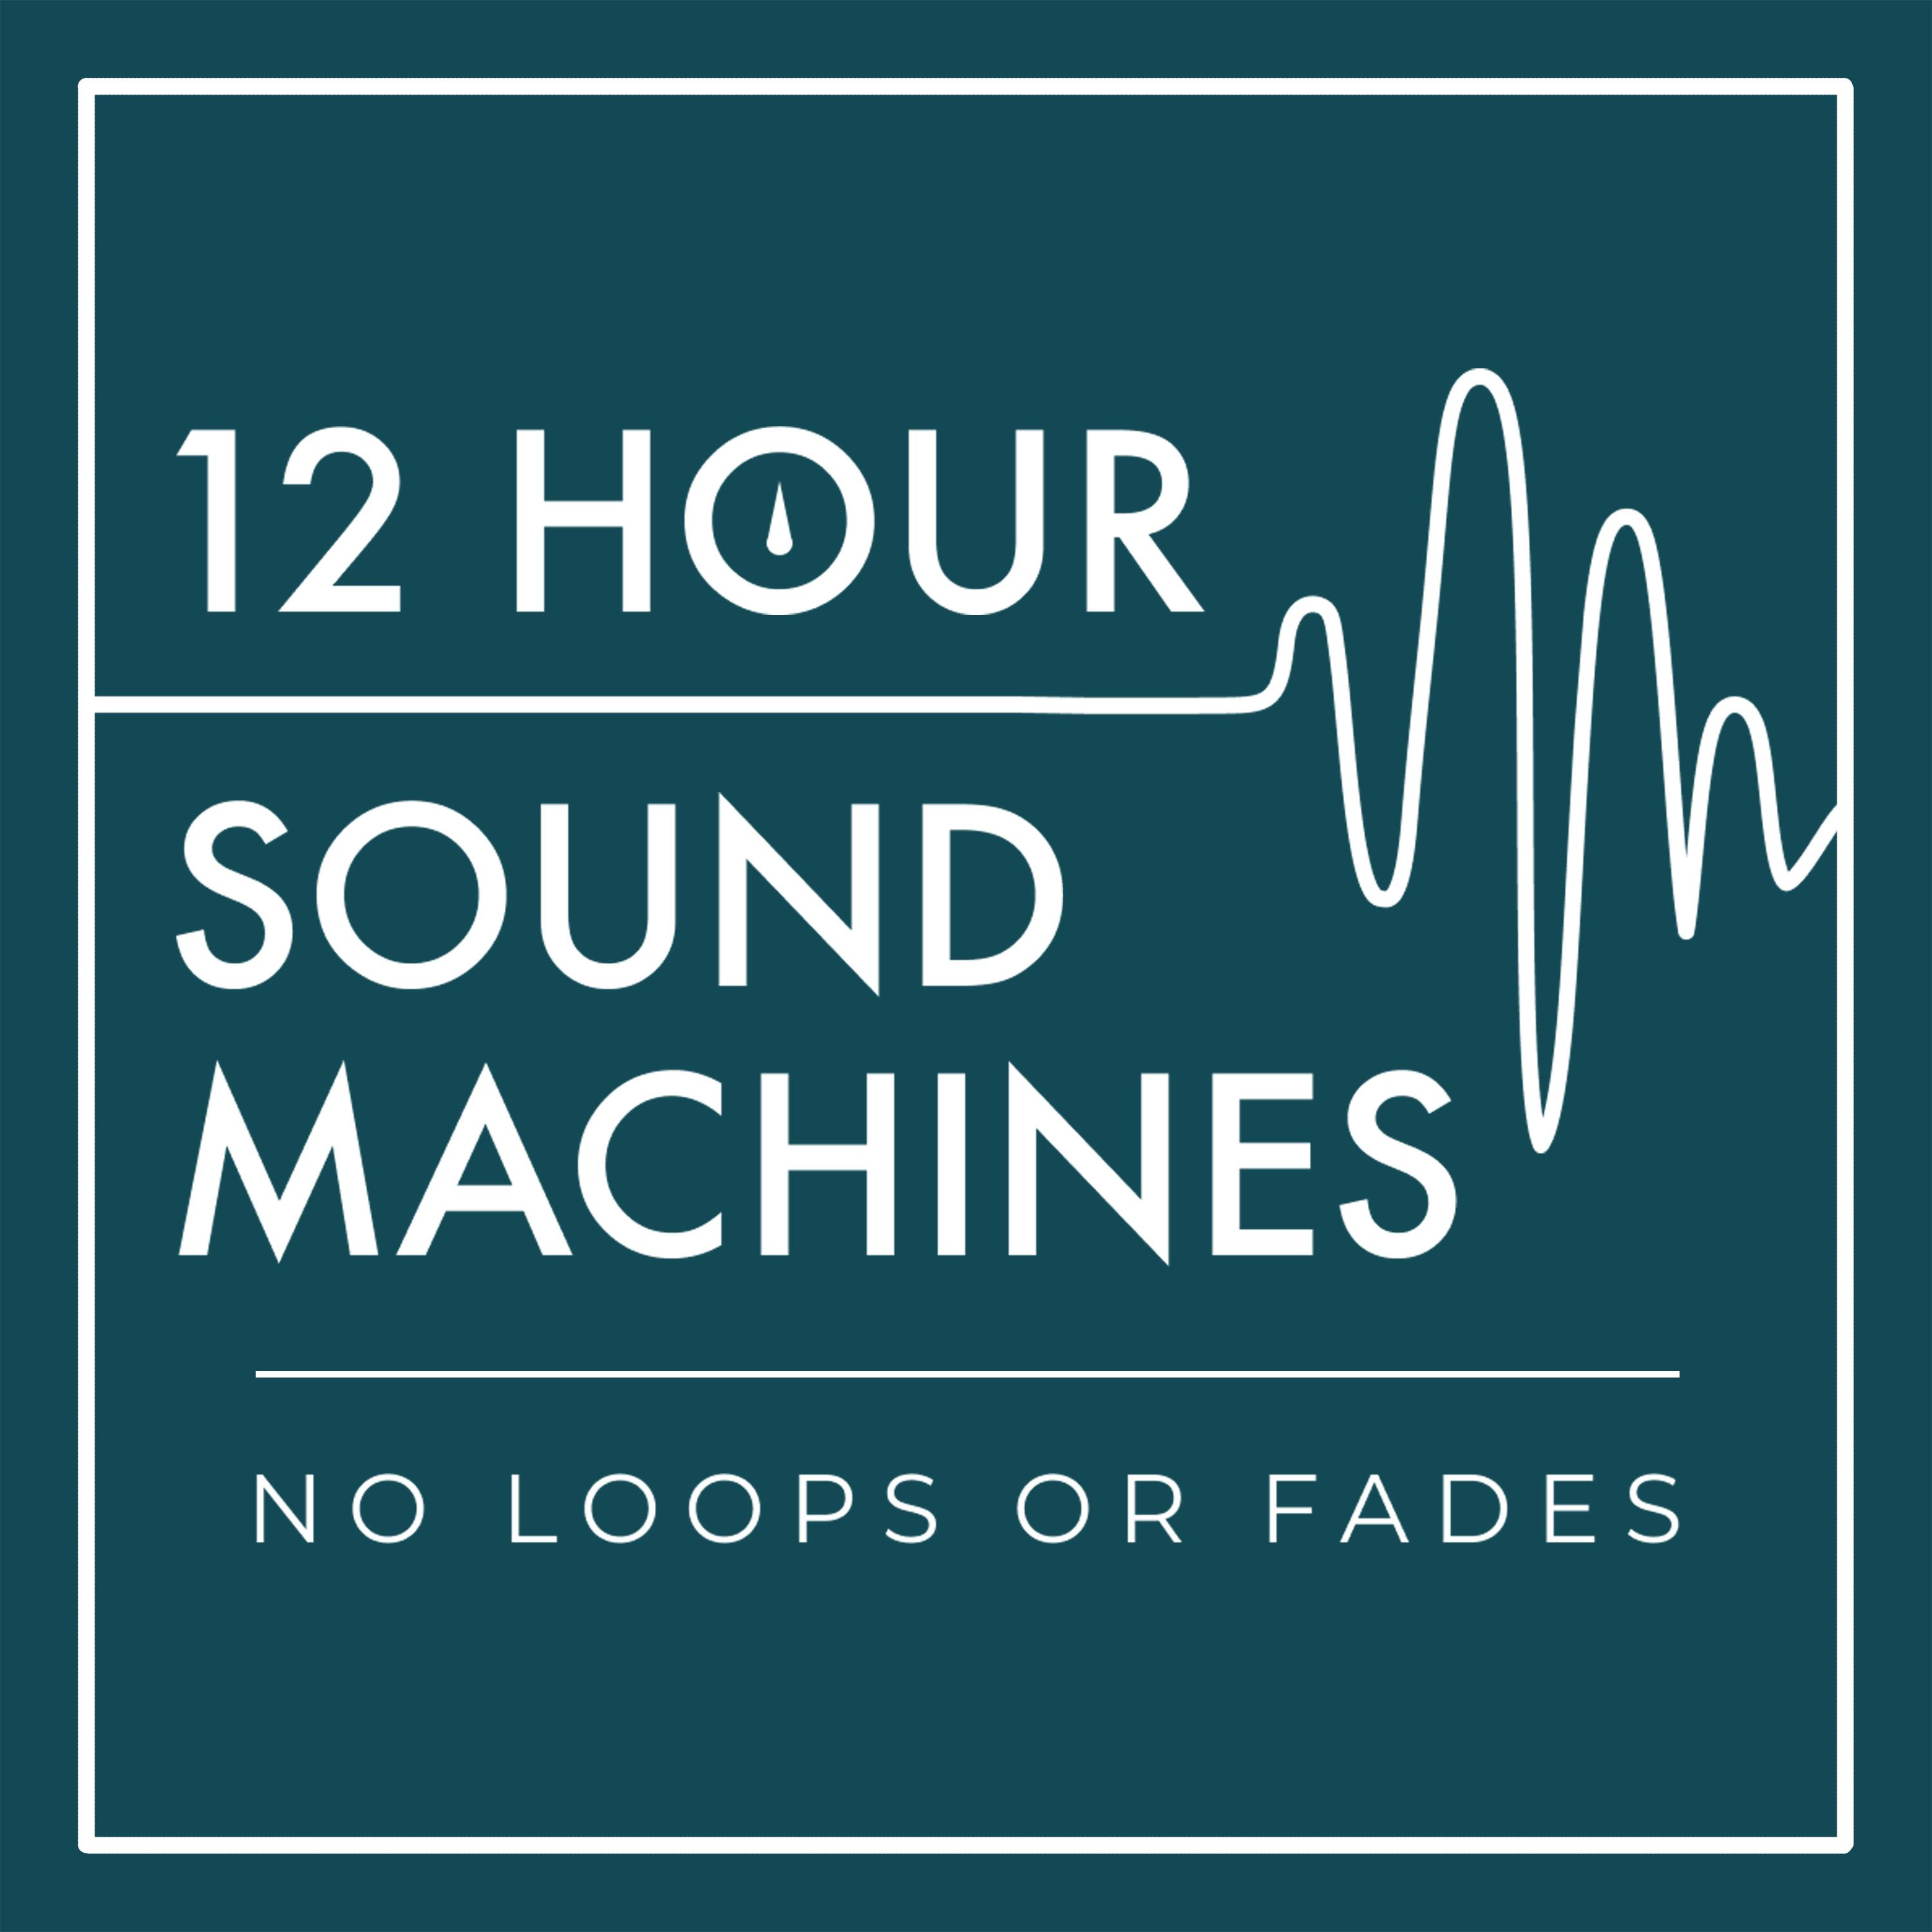 12 Hour Sound Machines (no loops or fades):12 Hour Sound Machines | Achieve Restful Sleep, Soothe a Baby, Mask Unwanted Noise, Calm Your Anxiety